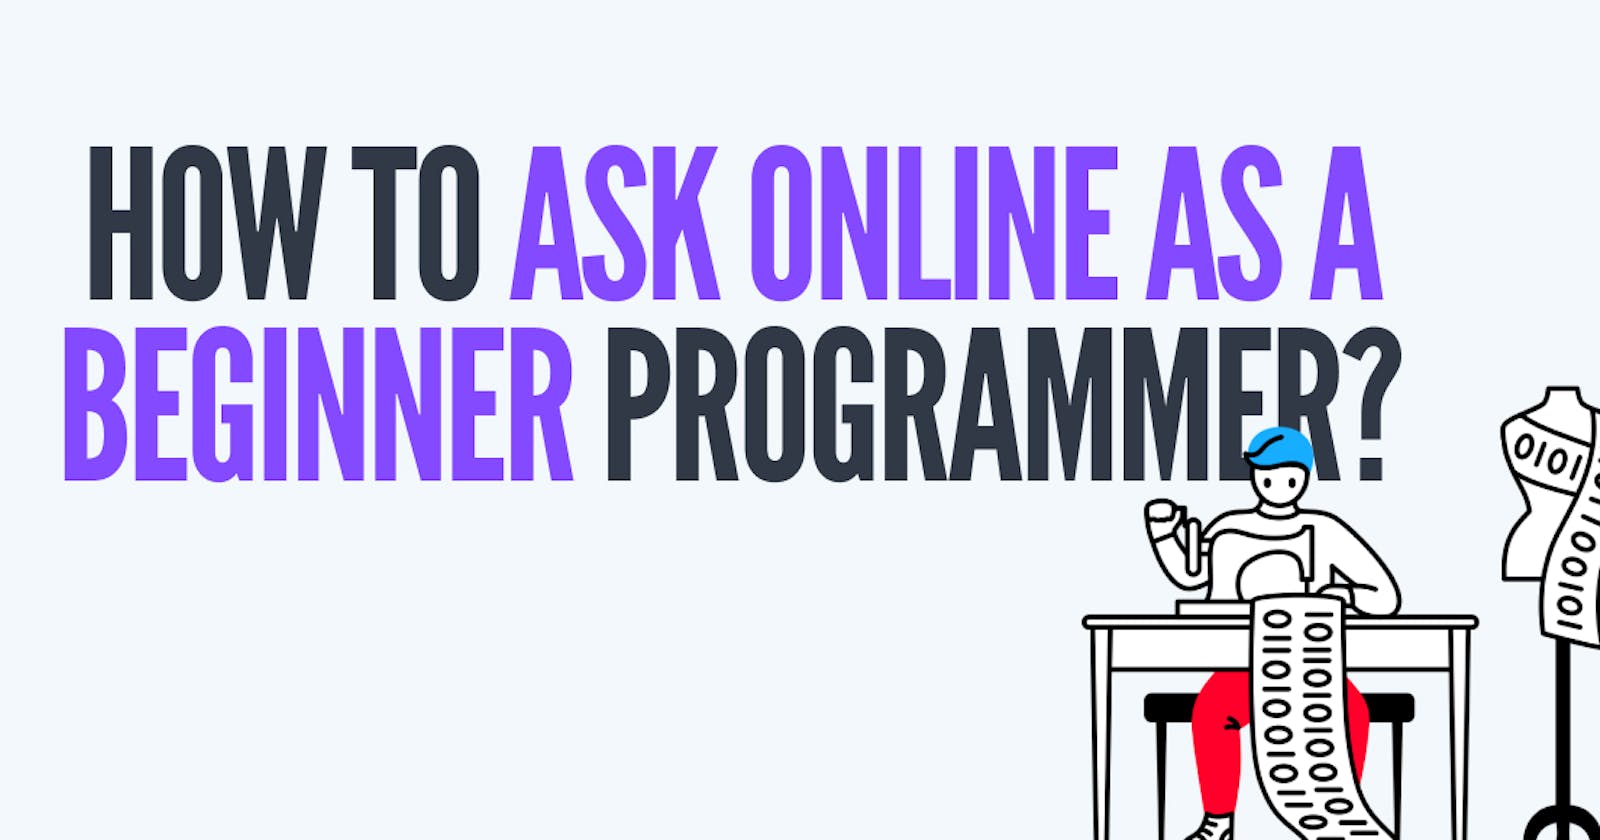 How to ask online as a beginner programmer?